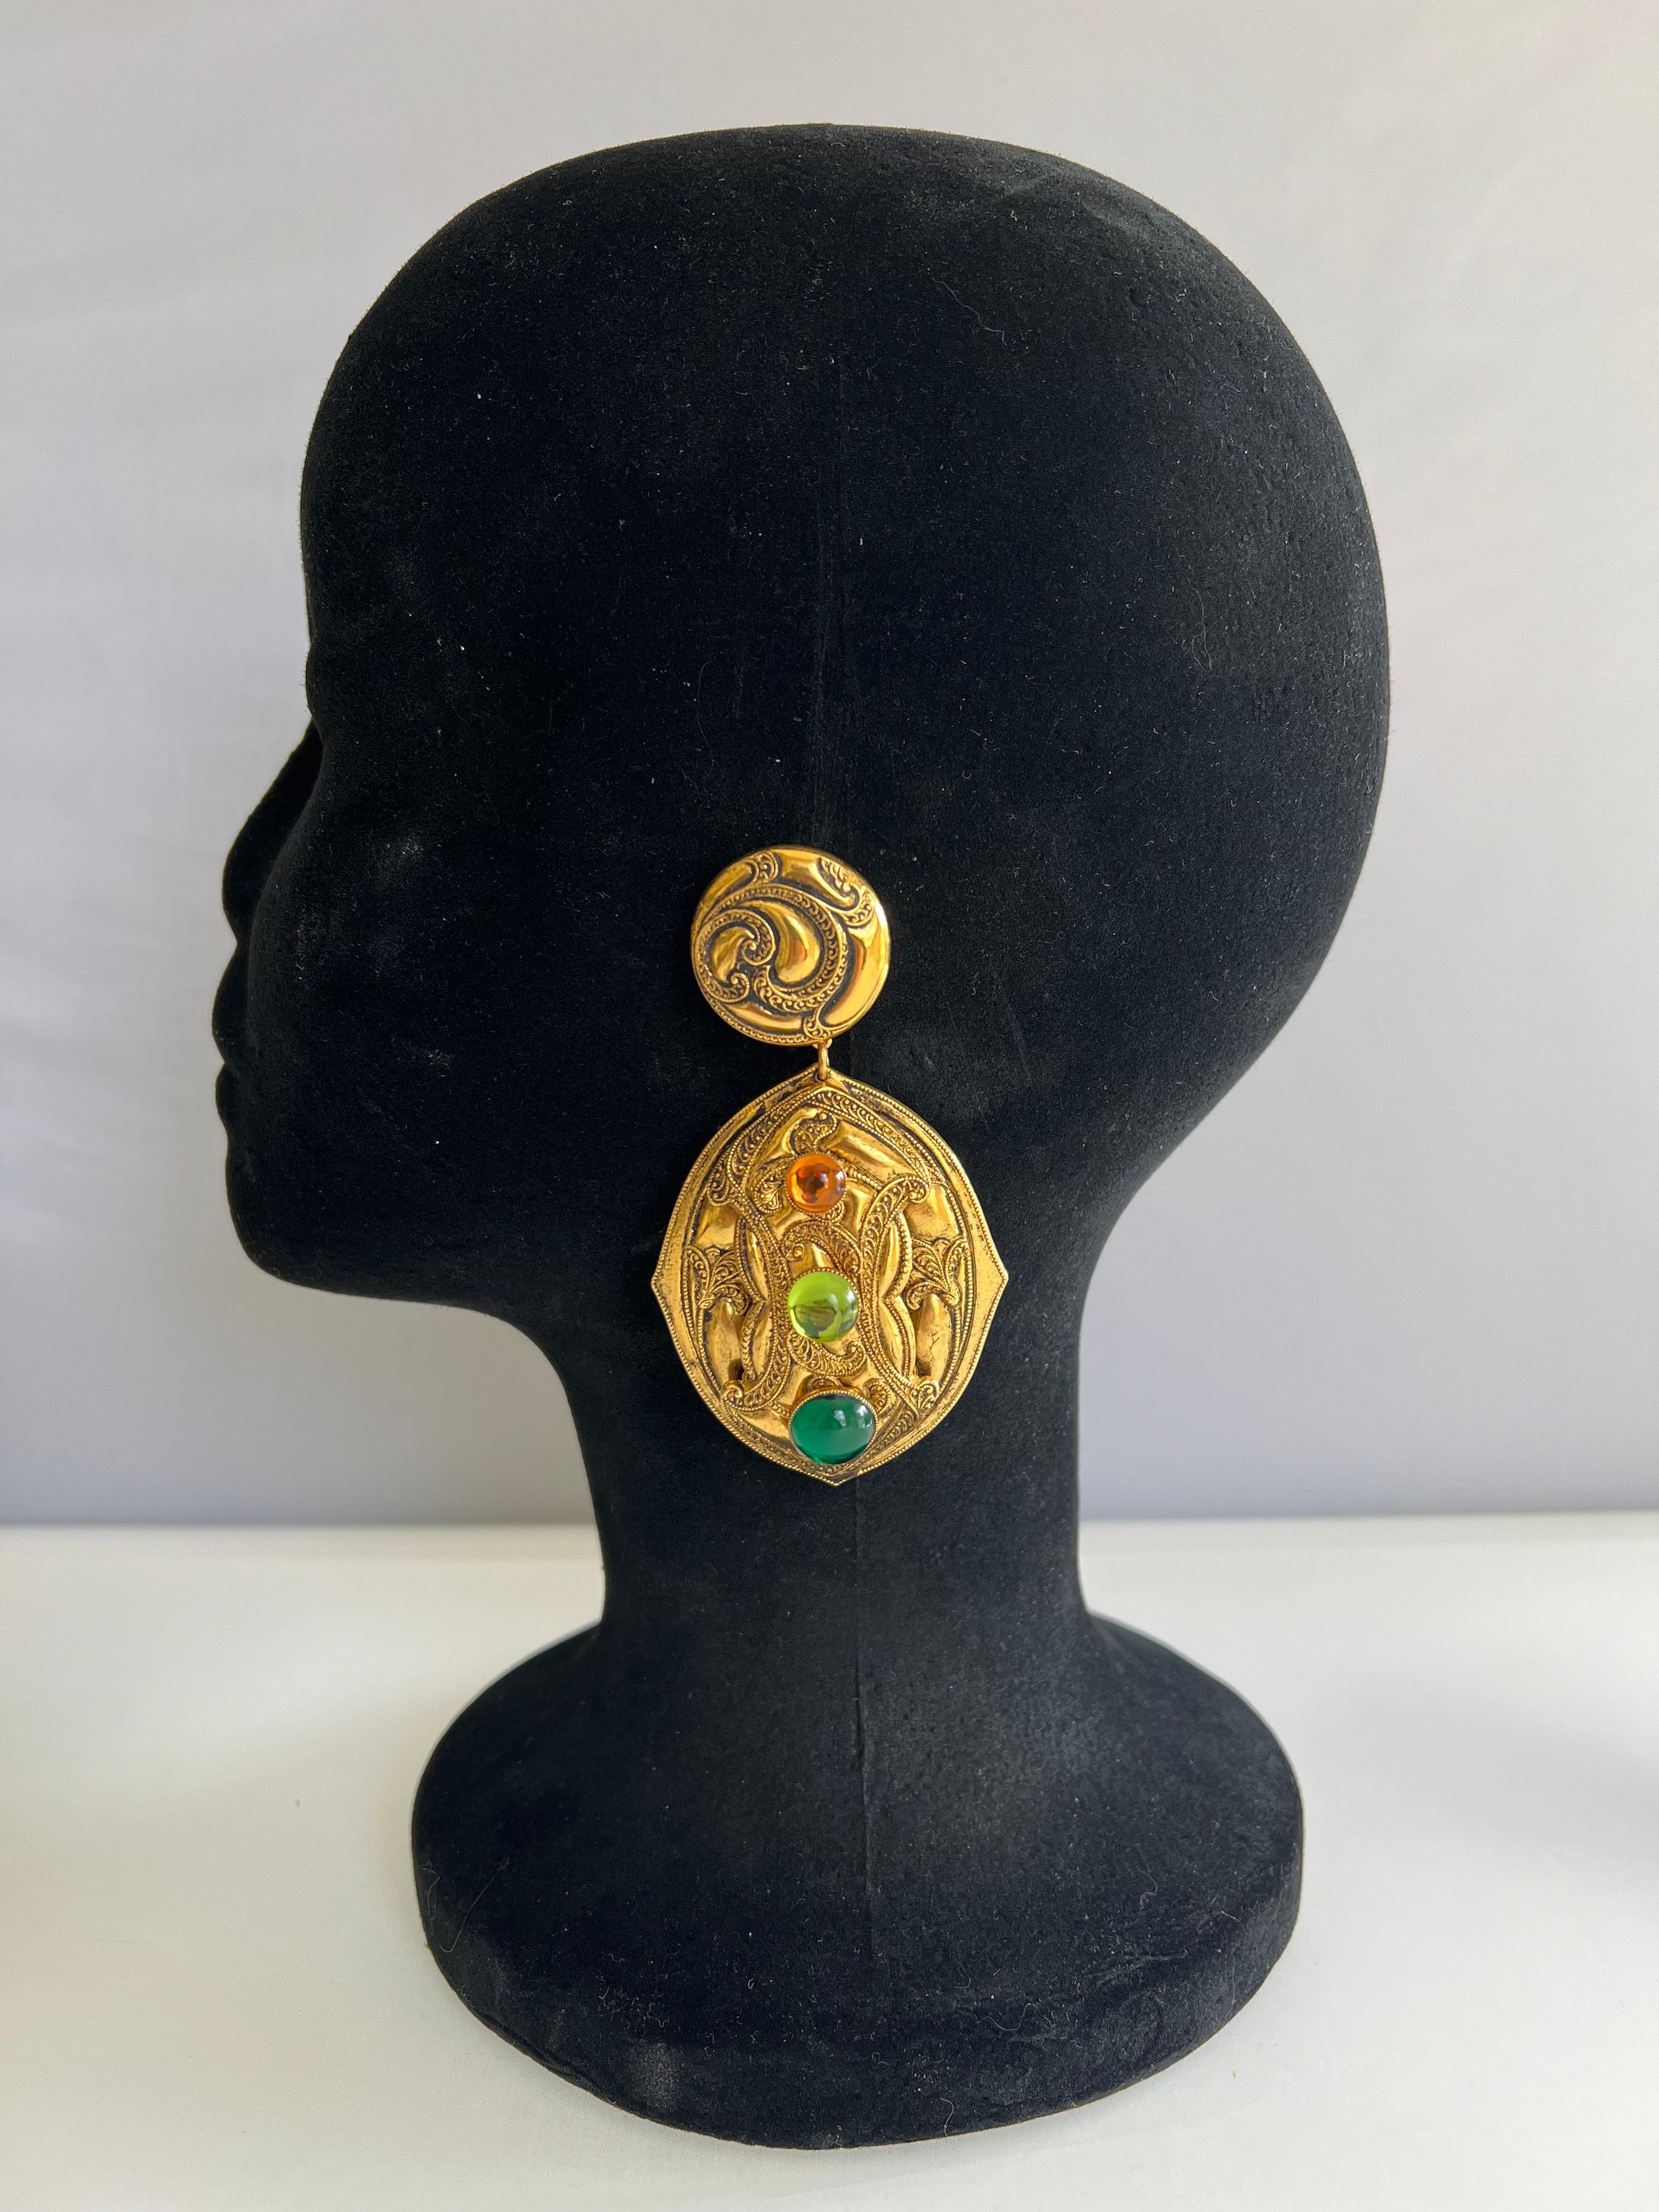 Vintage French clip-on Etruscan style earrings. The gilt metal earrings have a very ornate motif and are adorned by three sizeable colored resin cabochons. 